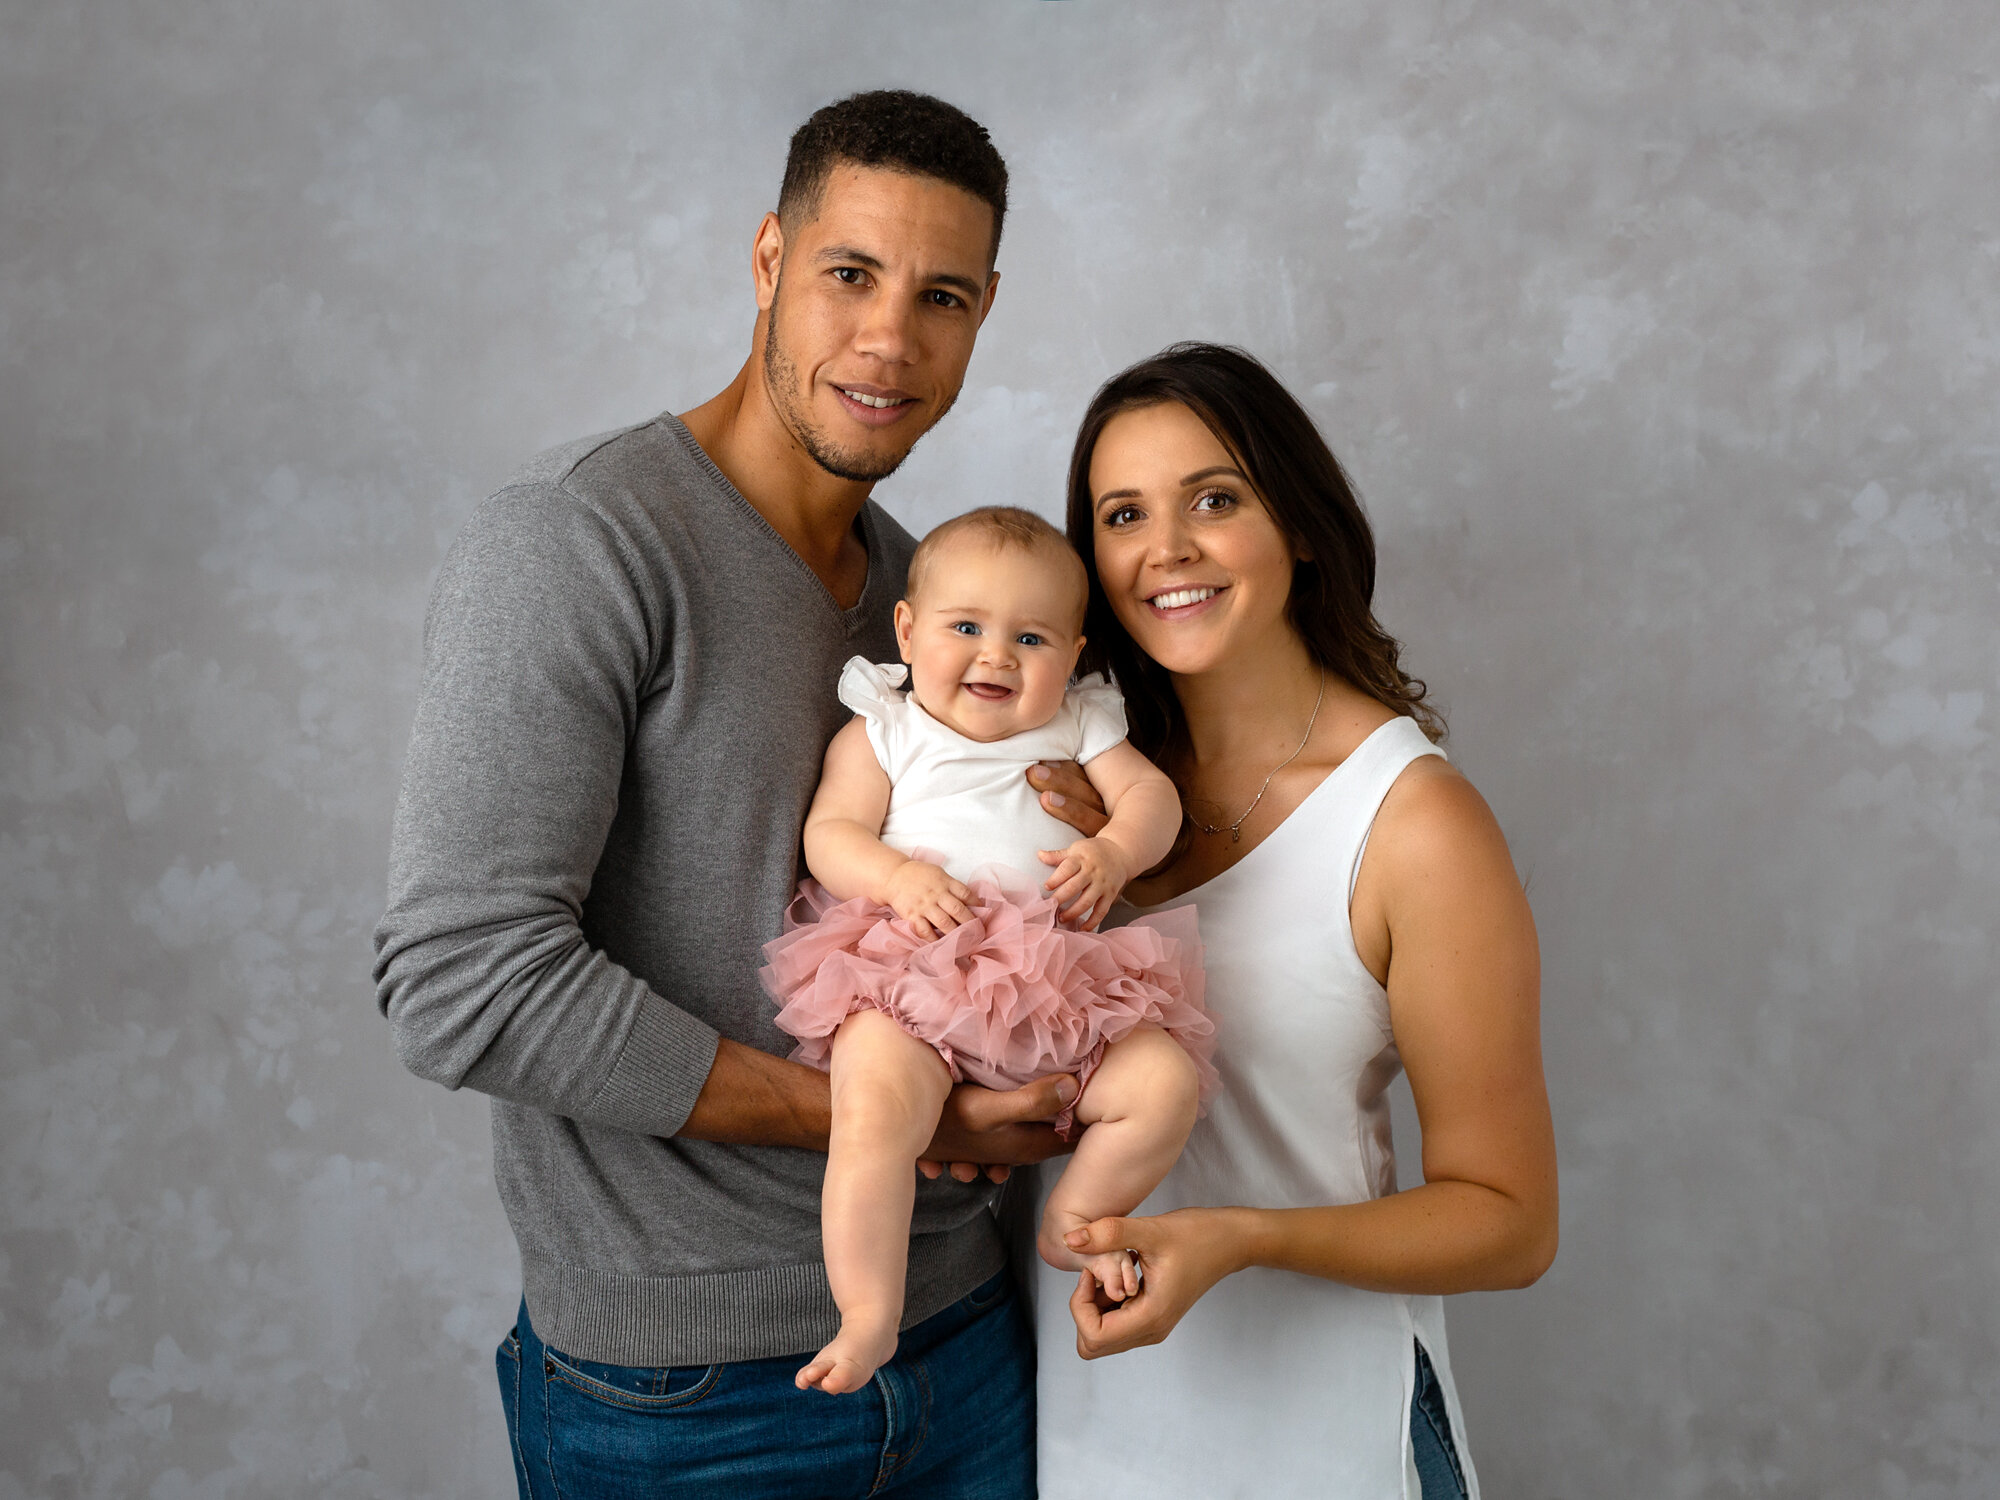 family baby photographer south wales, cardiff near caerphilly